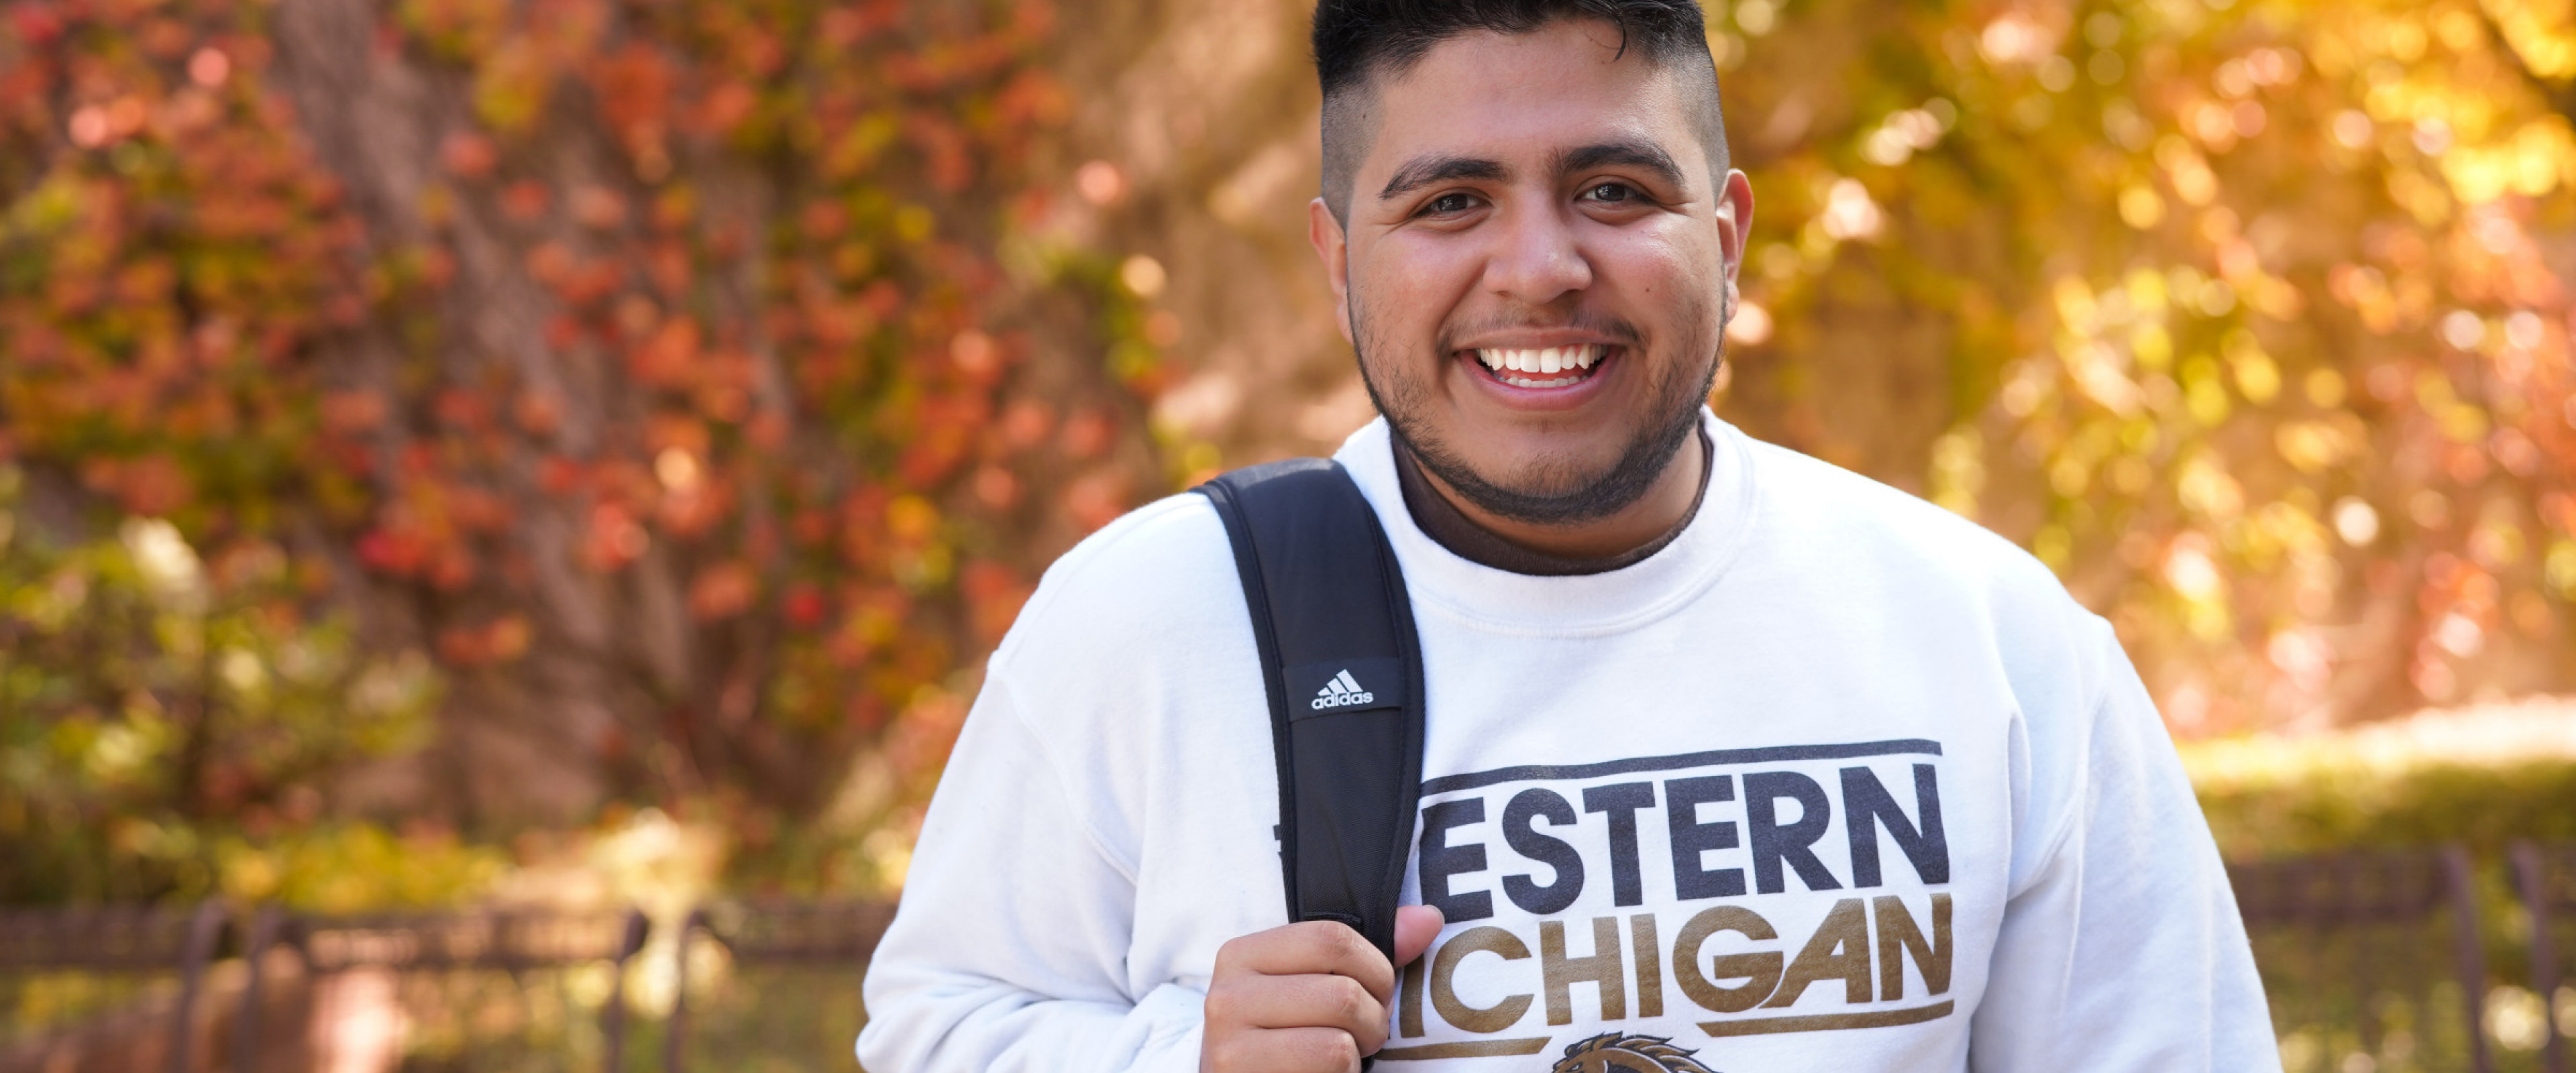 A student smiling on campus with fall foliage in the background